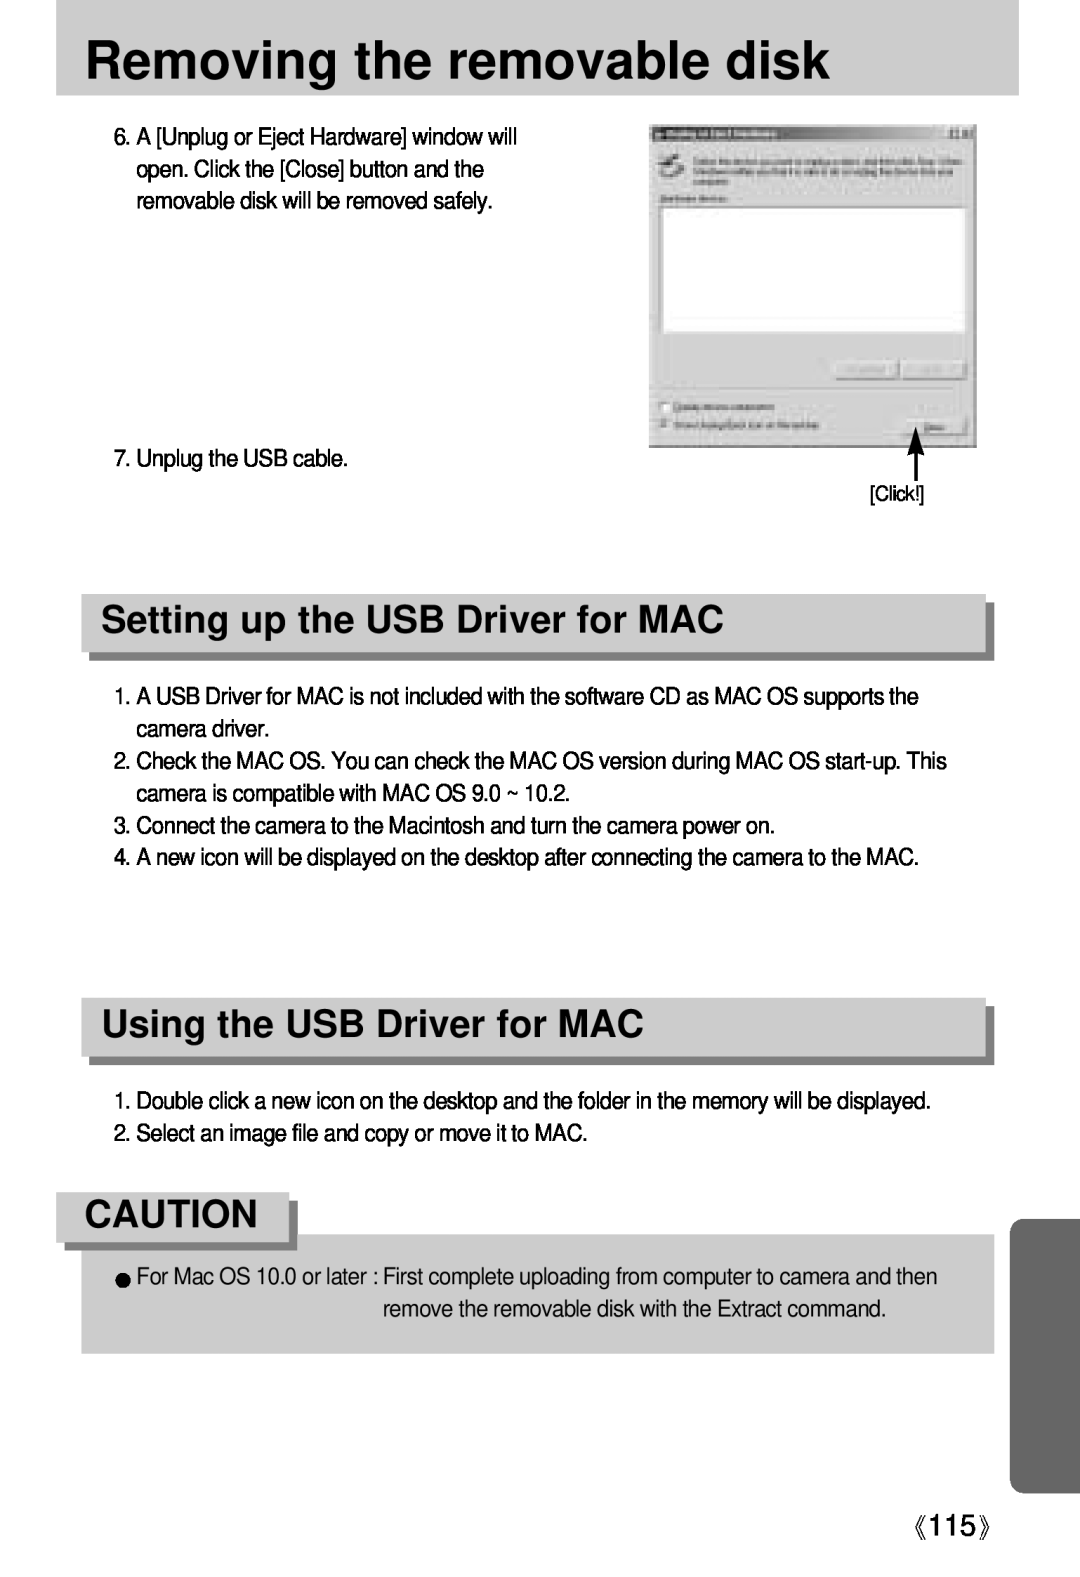 Samsung Digimax U-CA Setting up the USB Driver for MAC, Using the USB Driver for MAC, Removing the removable disk 